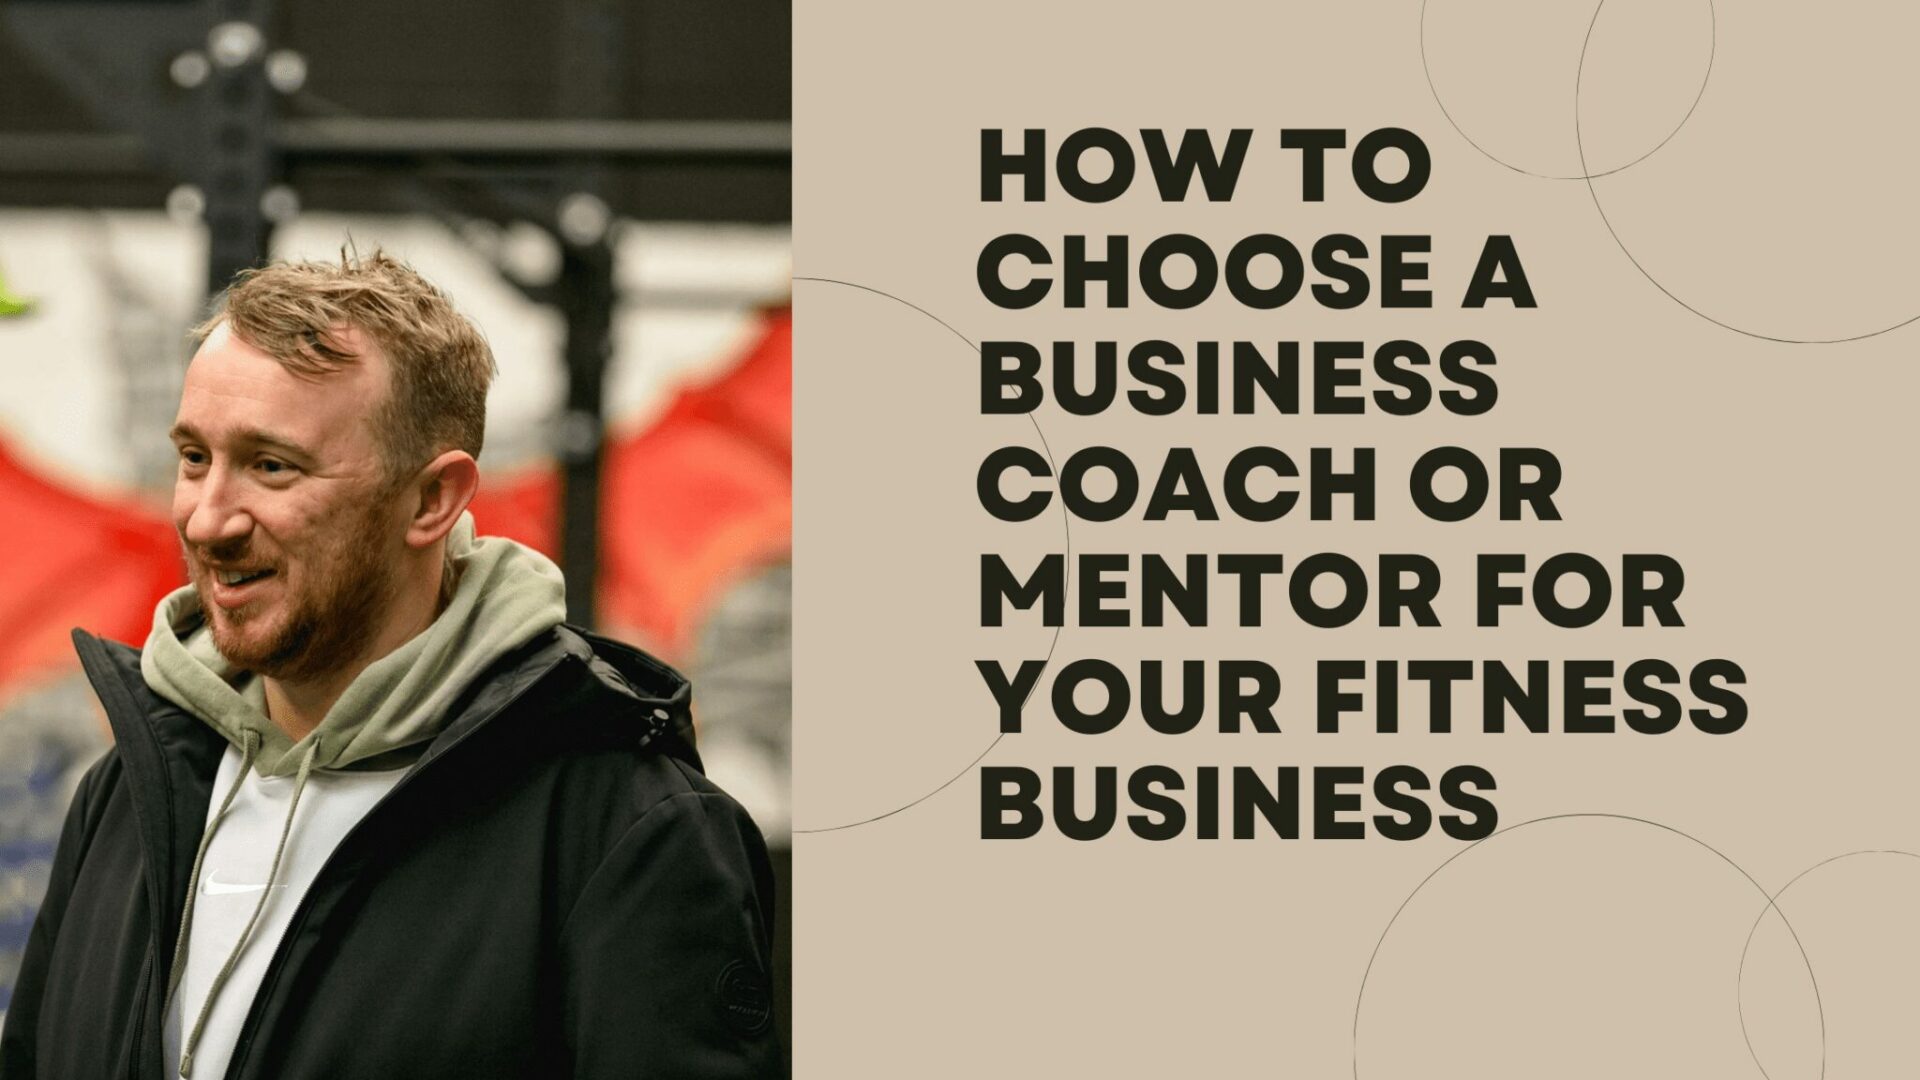 How to choose a business coach or mentor for your fitness business